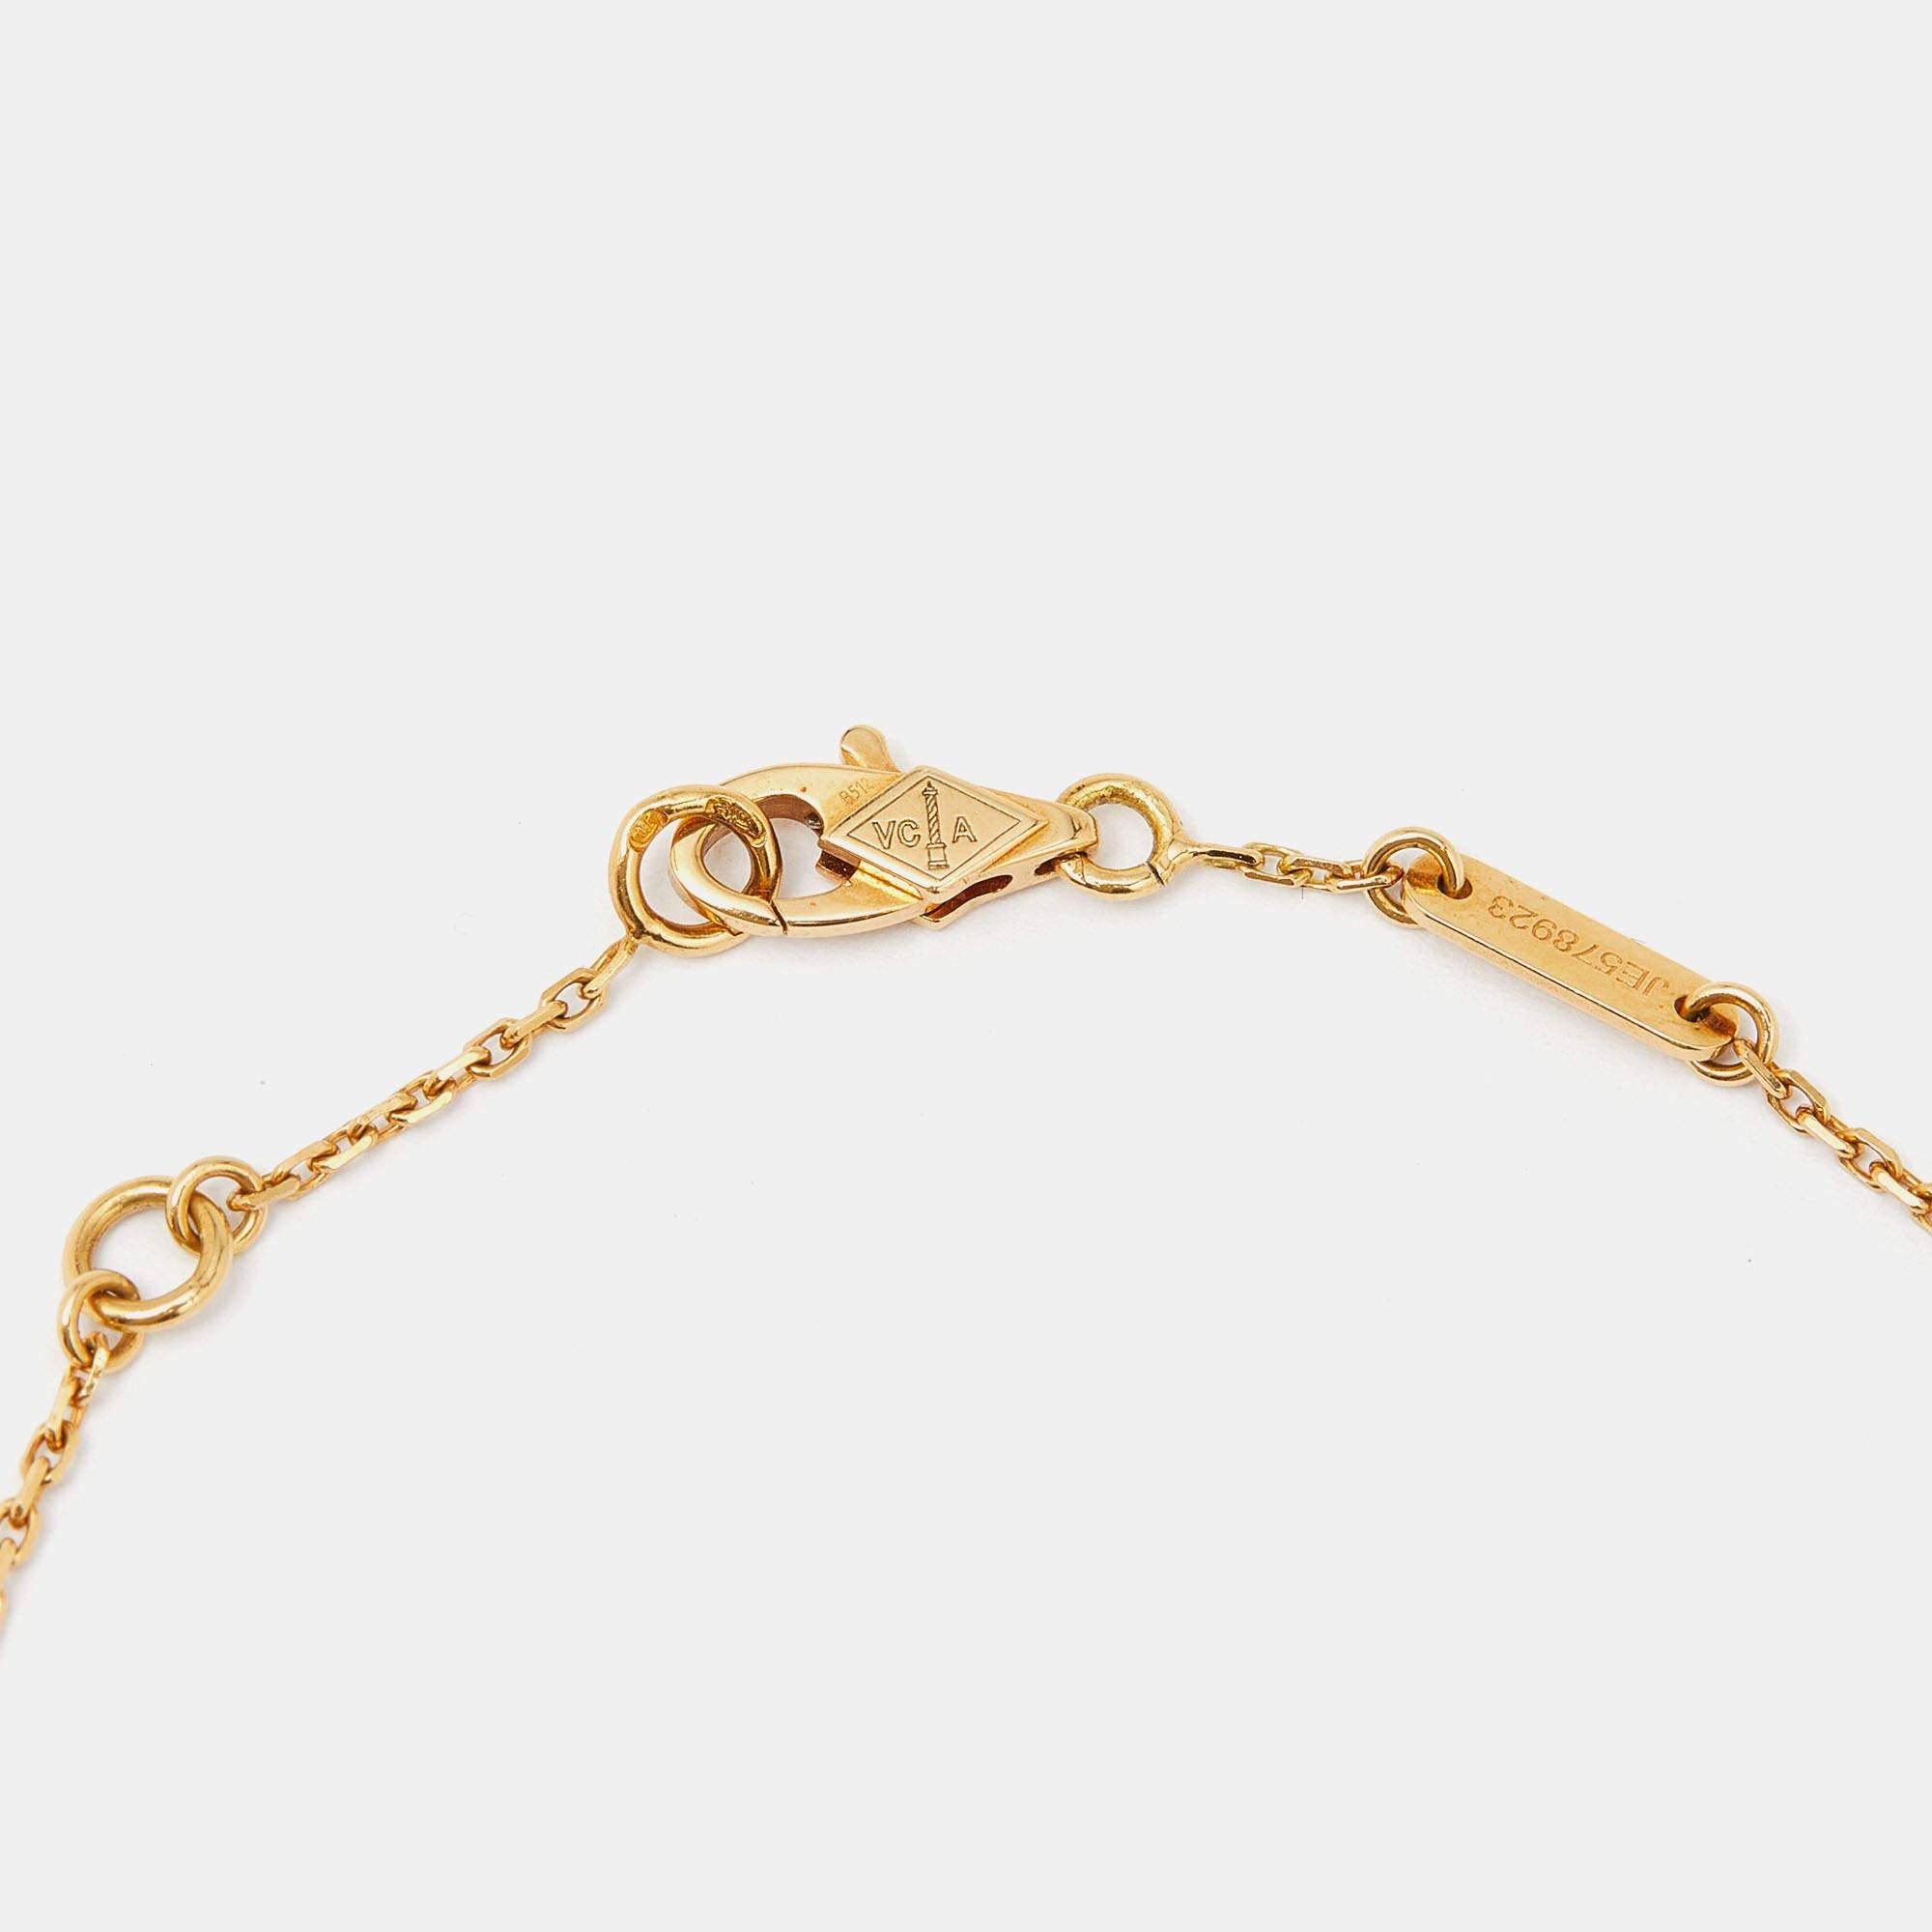 The Van Cleef & Arpels bracelet is an exquisite embodiment of elegance. Crafted with meticulous attention to detail, its delicate design features a luminous mother-of-pearl motif set in radiant 18k yellow gold, exuding timeless sophistication and